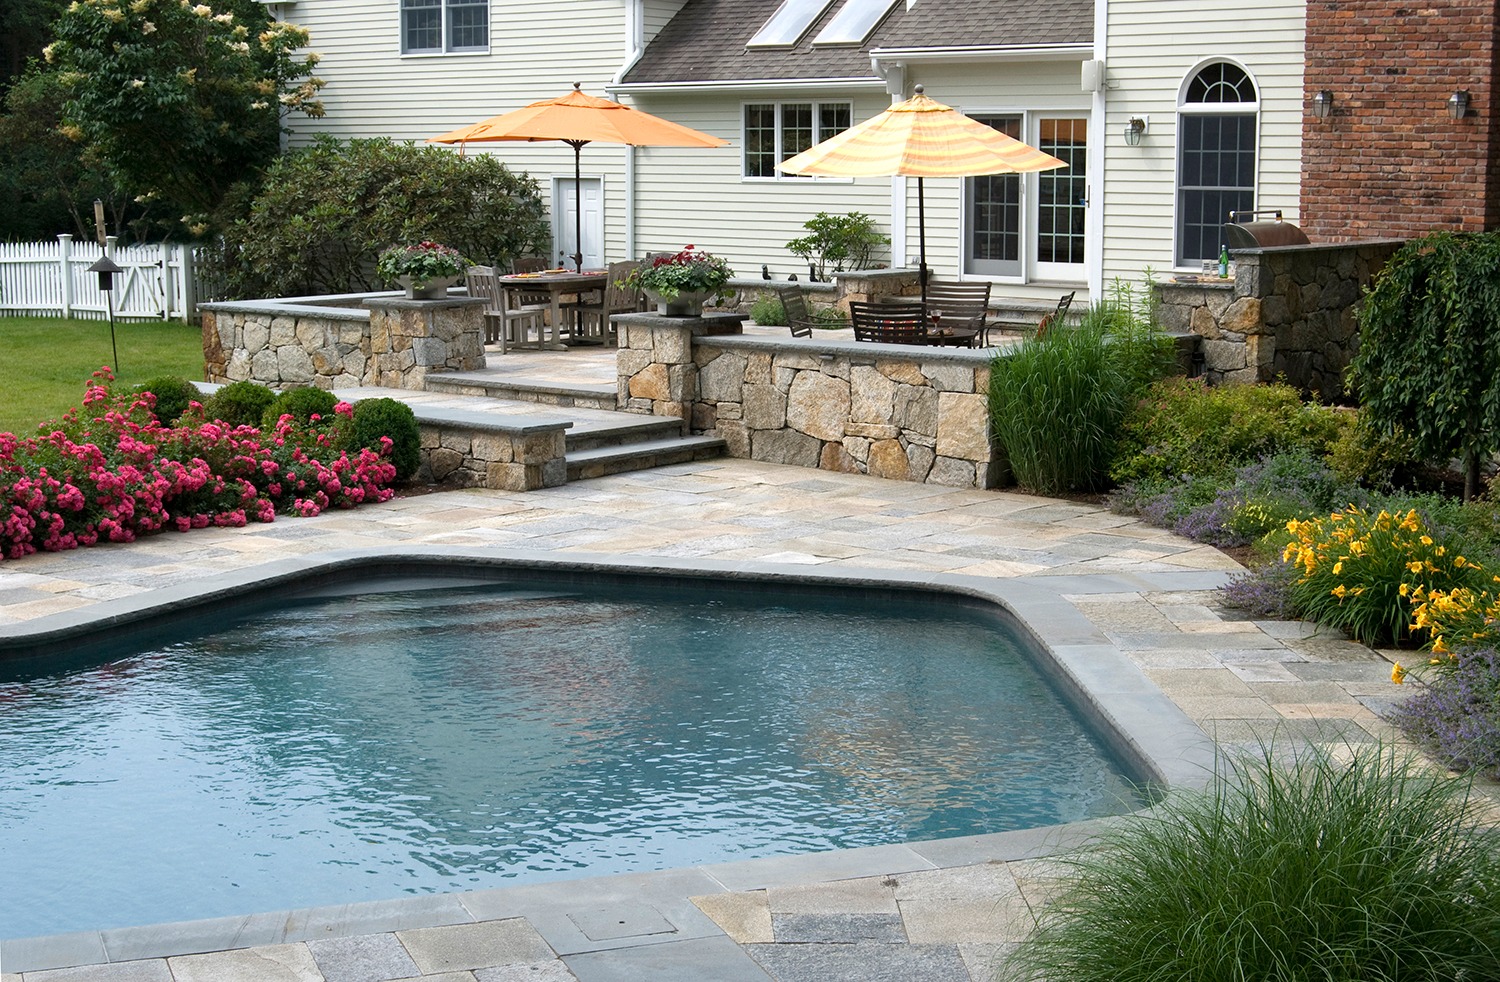 An elegant backyard featuring a swimming pool with stone coping, surrounded by lush gardens, patio furniture under umbrellas, adjacent to a residential home.